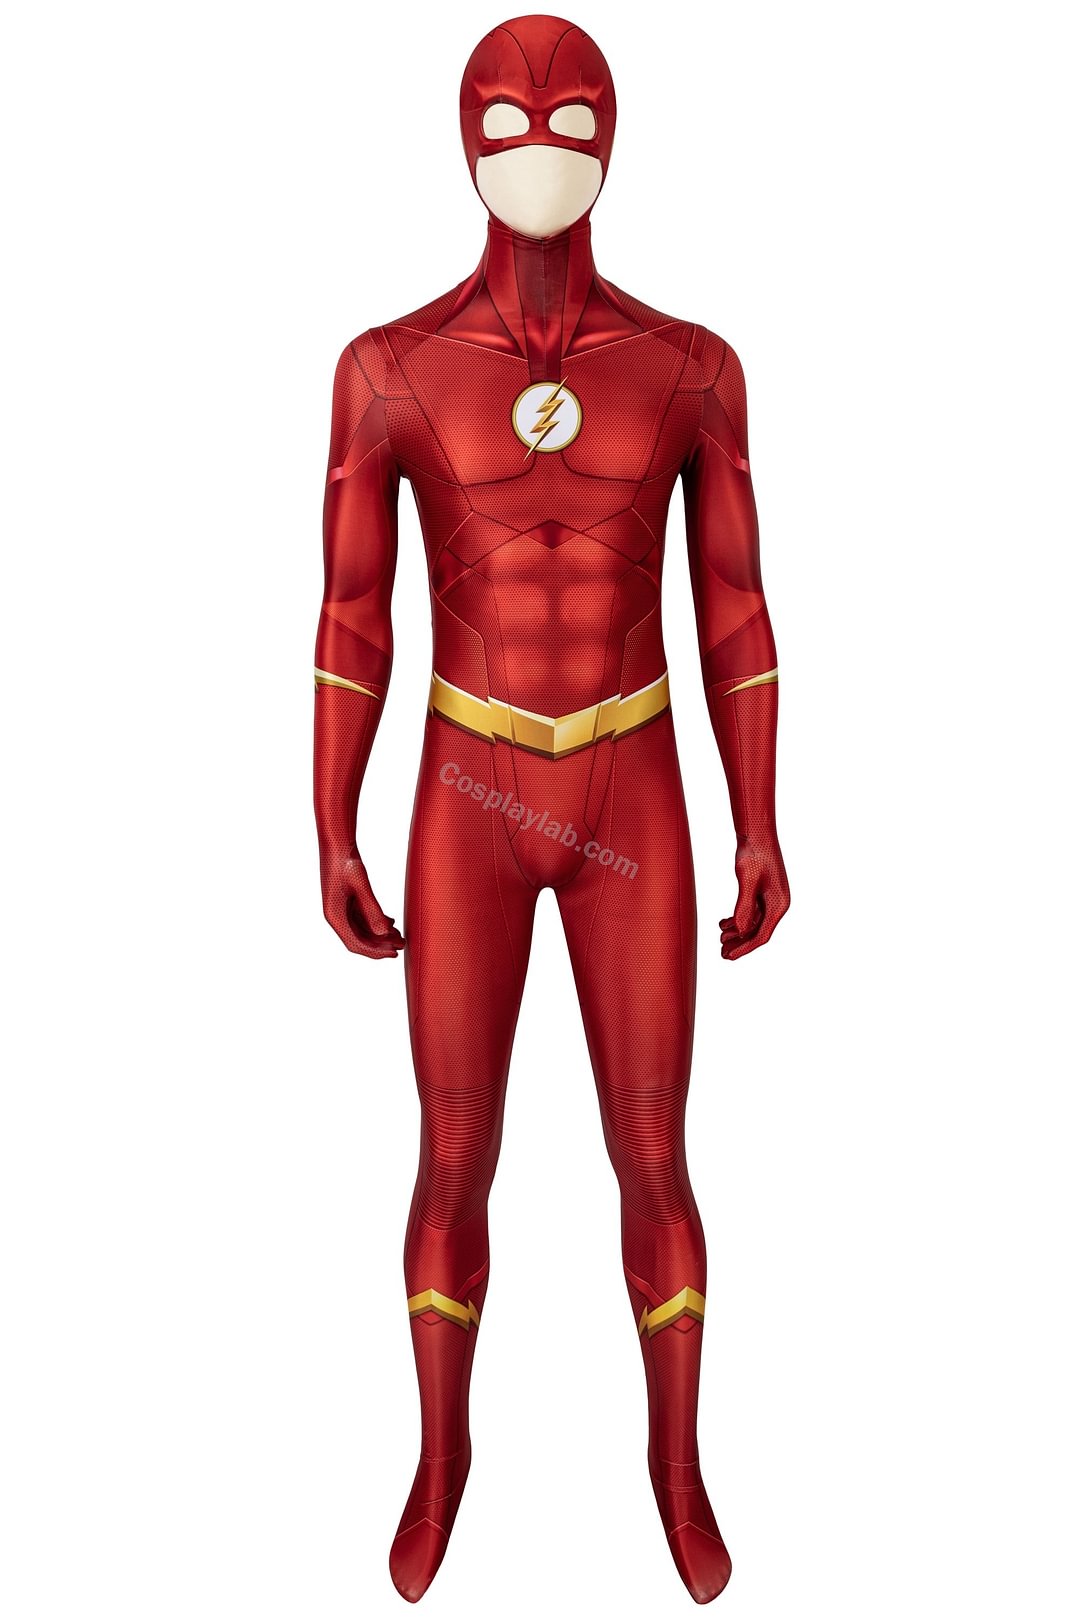 The Flash Cosplay Suit 3D Printed Spandex Season 6 Barry Allen Cosplay Red Suit By CosplayLab